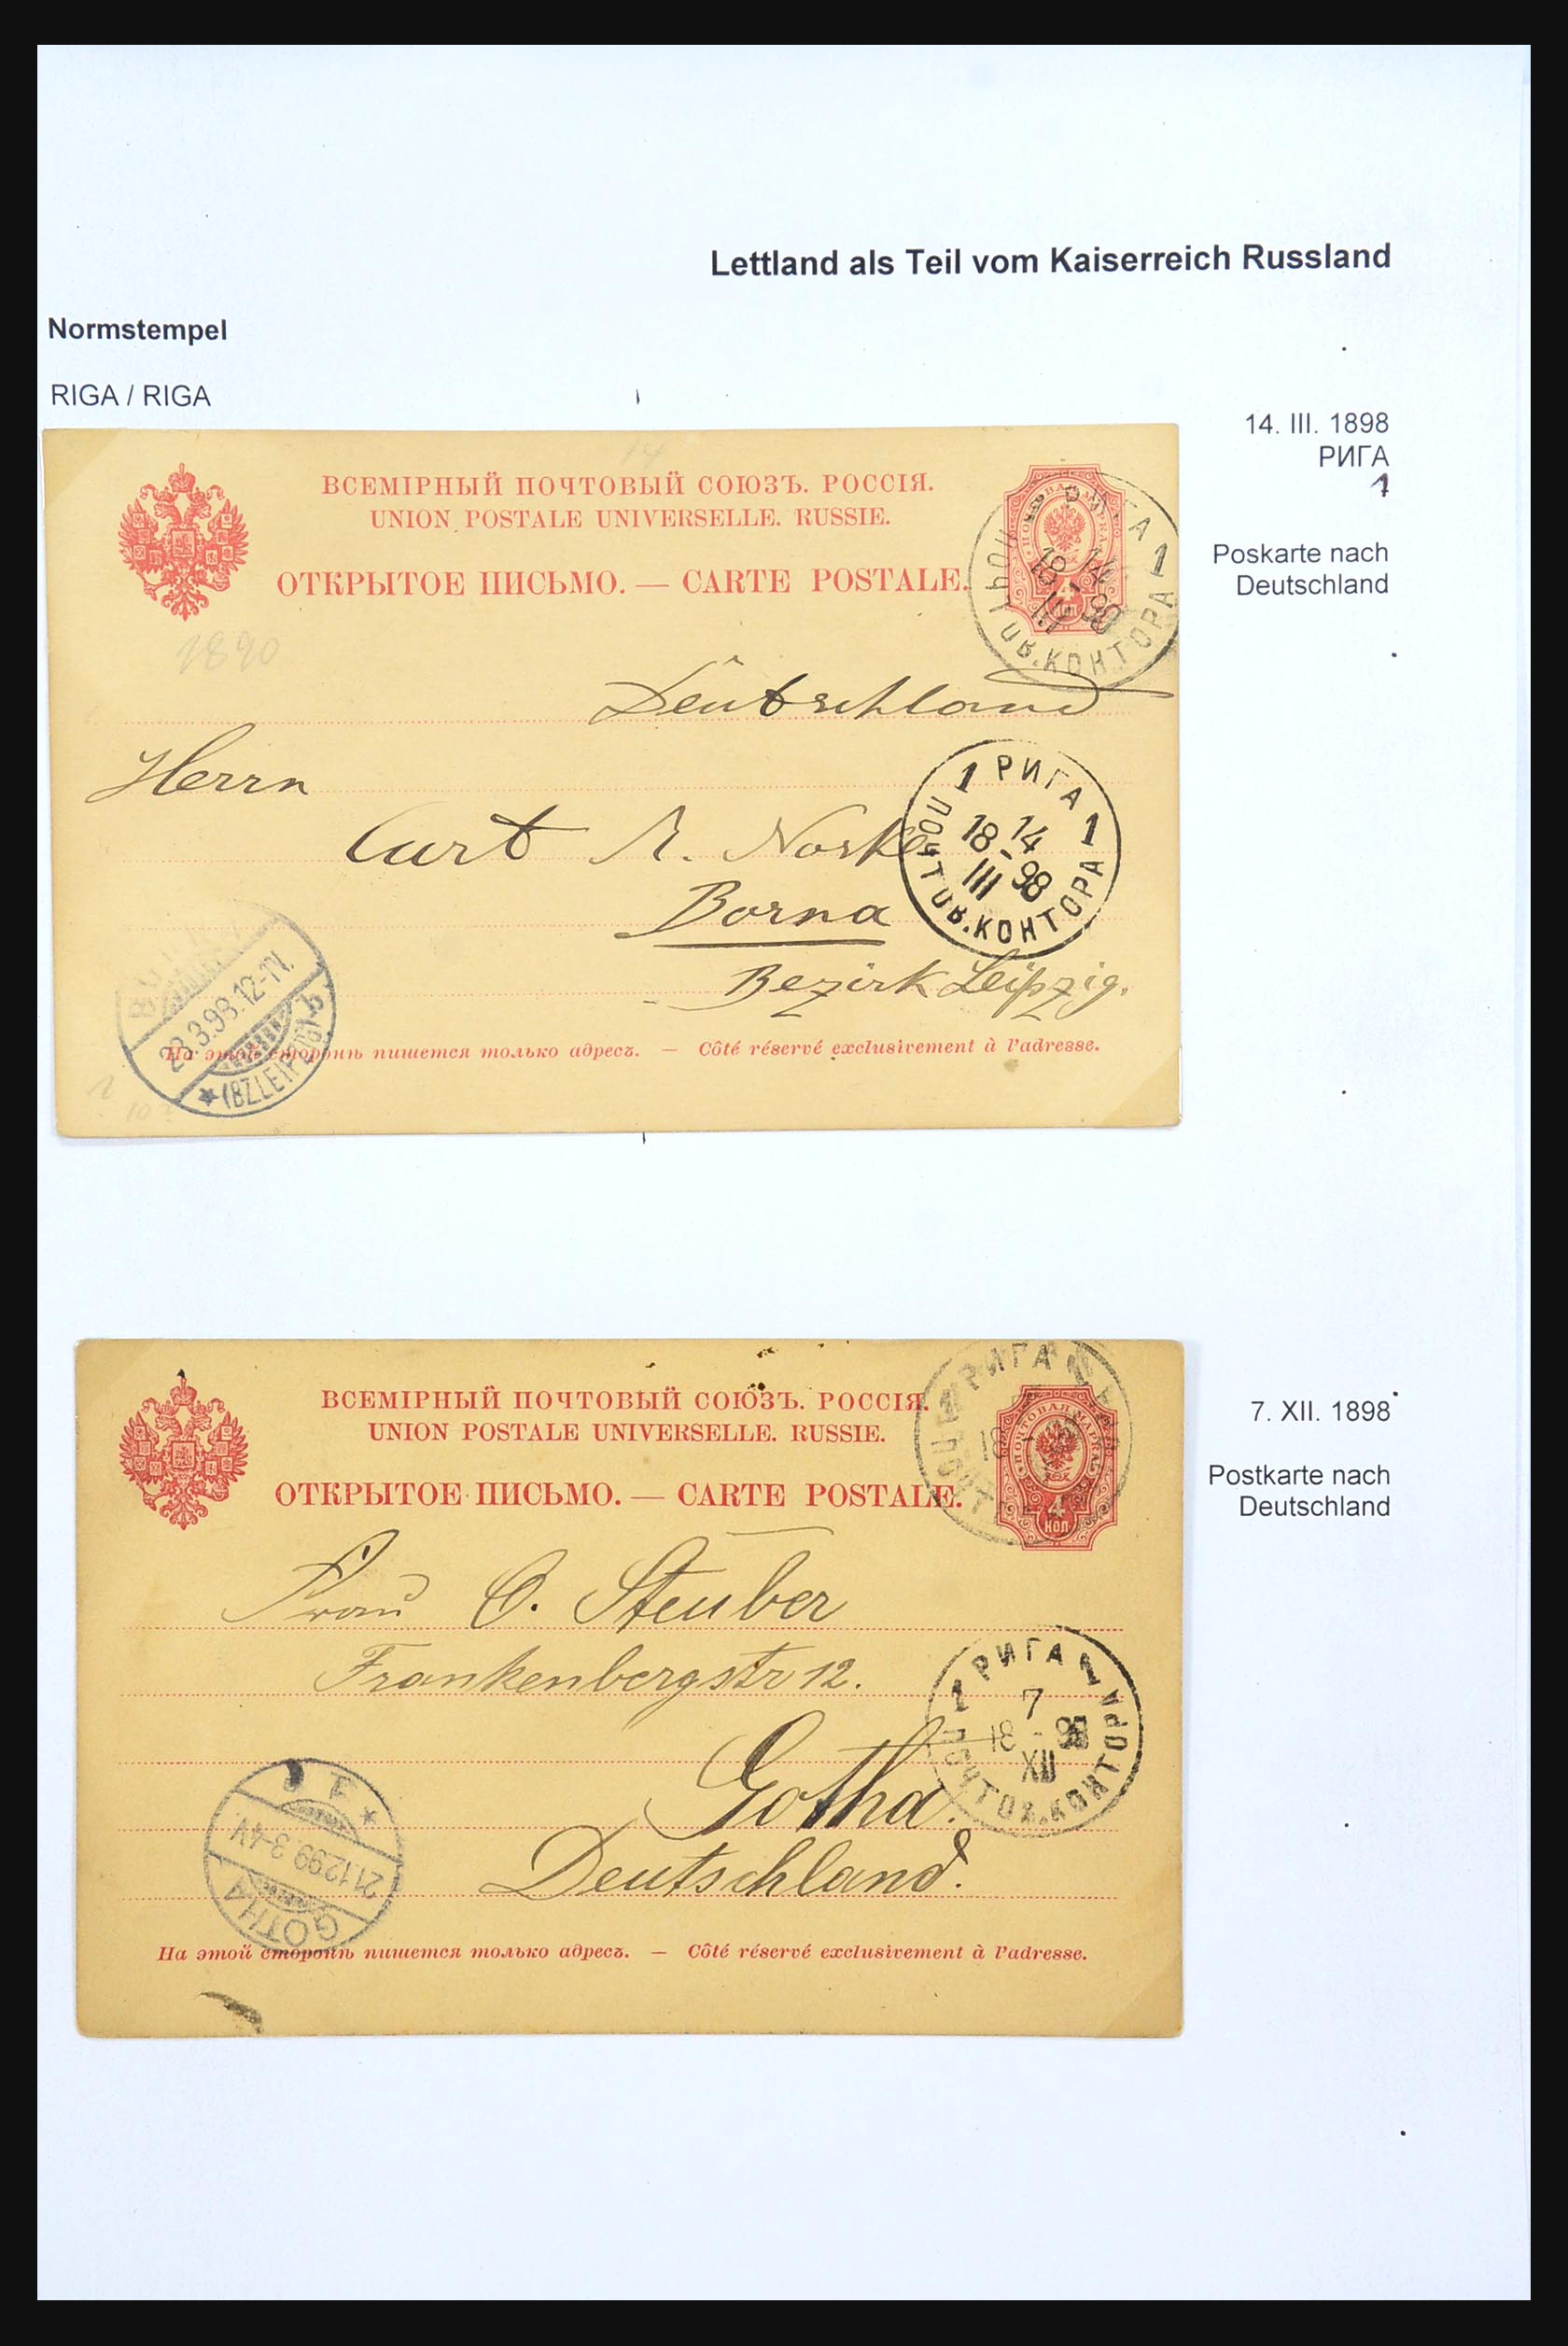 31305 132 - 31305 Latvia as part of Russia 1817-1918.